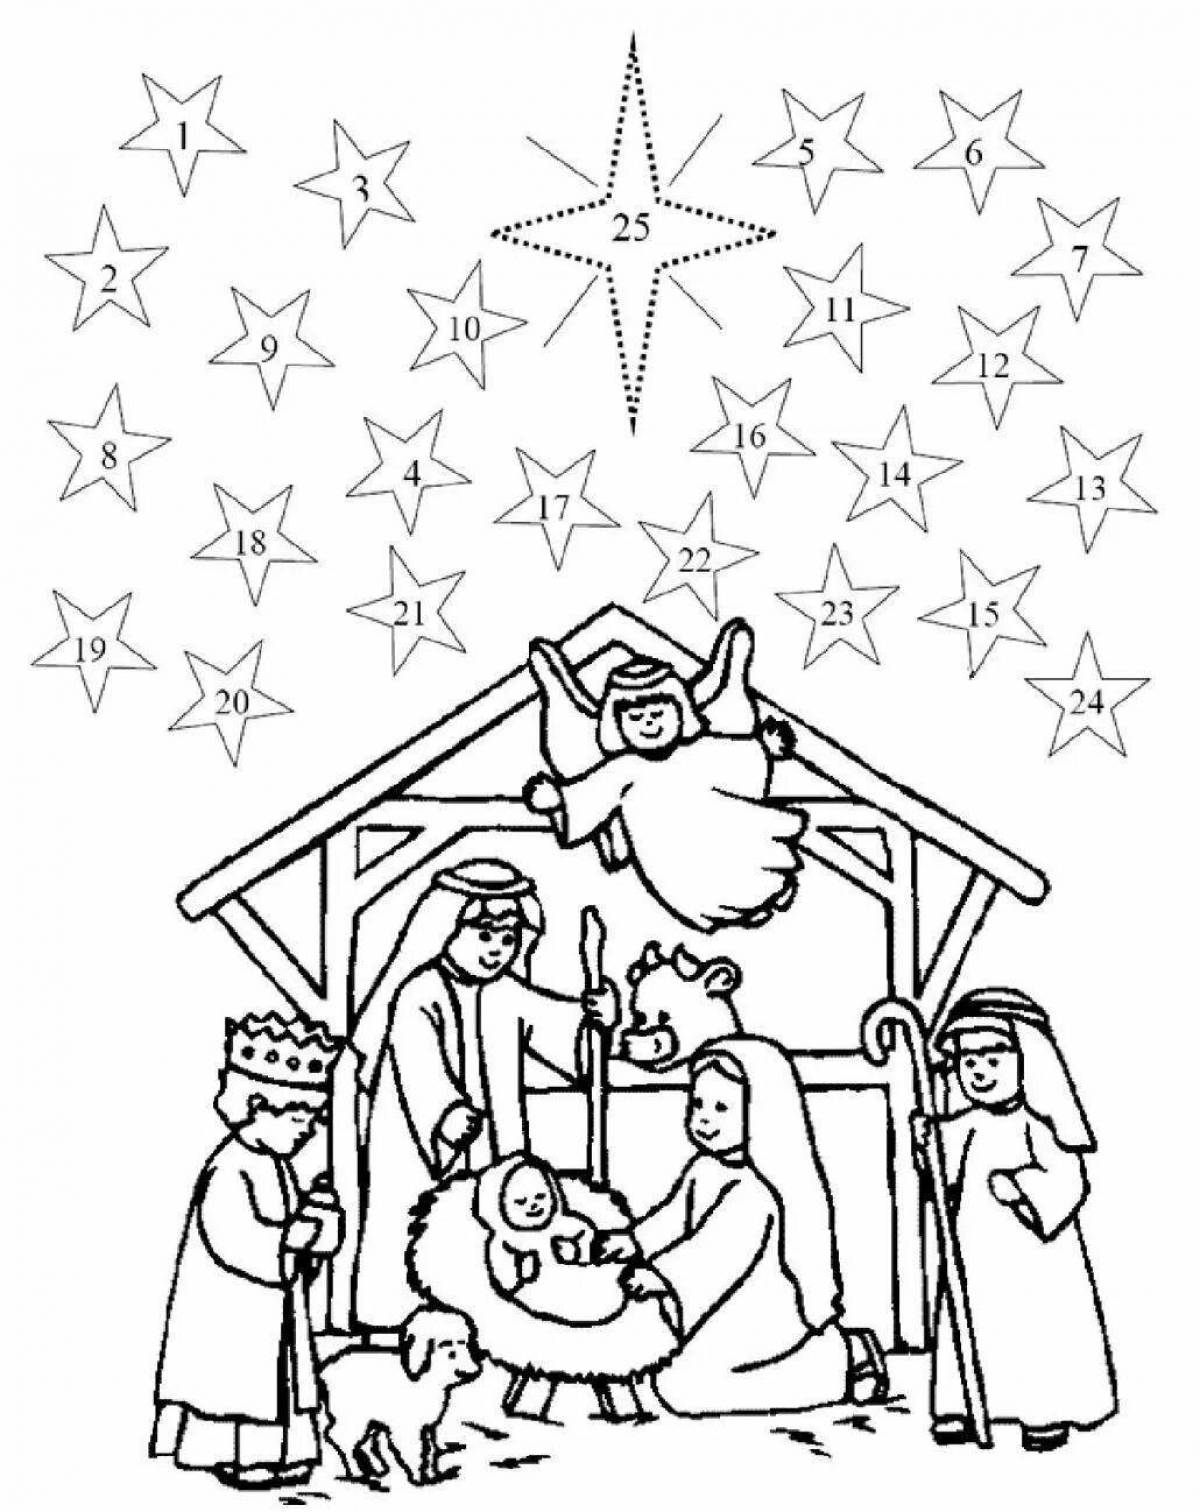 Fancy Christmas star coloring book for kids